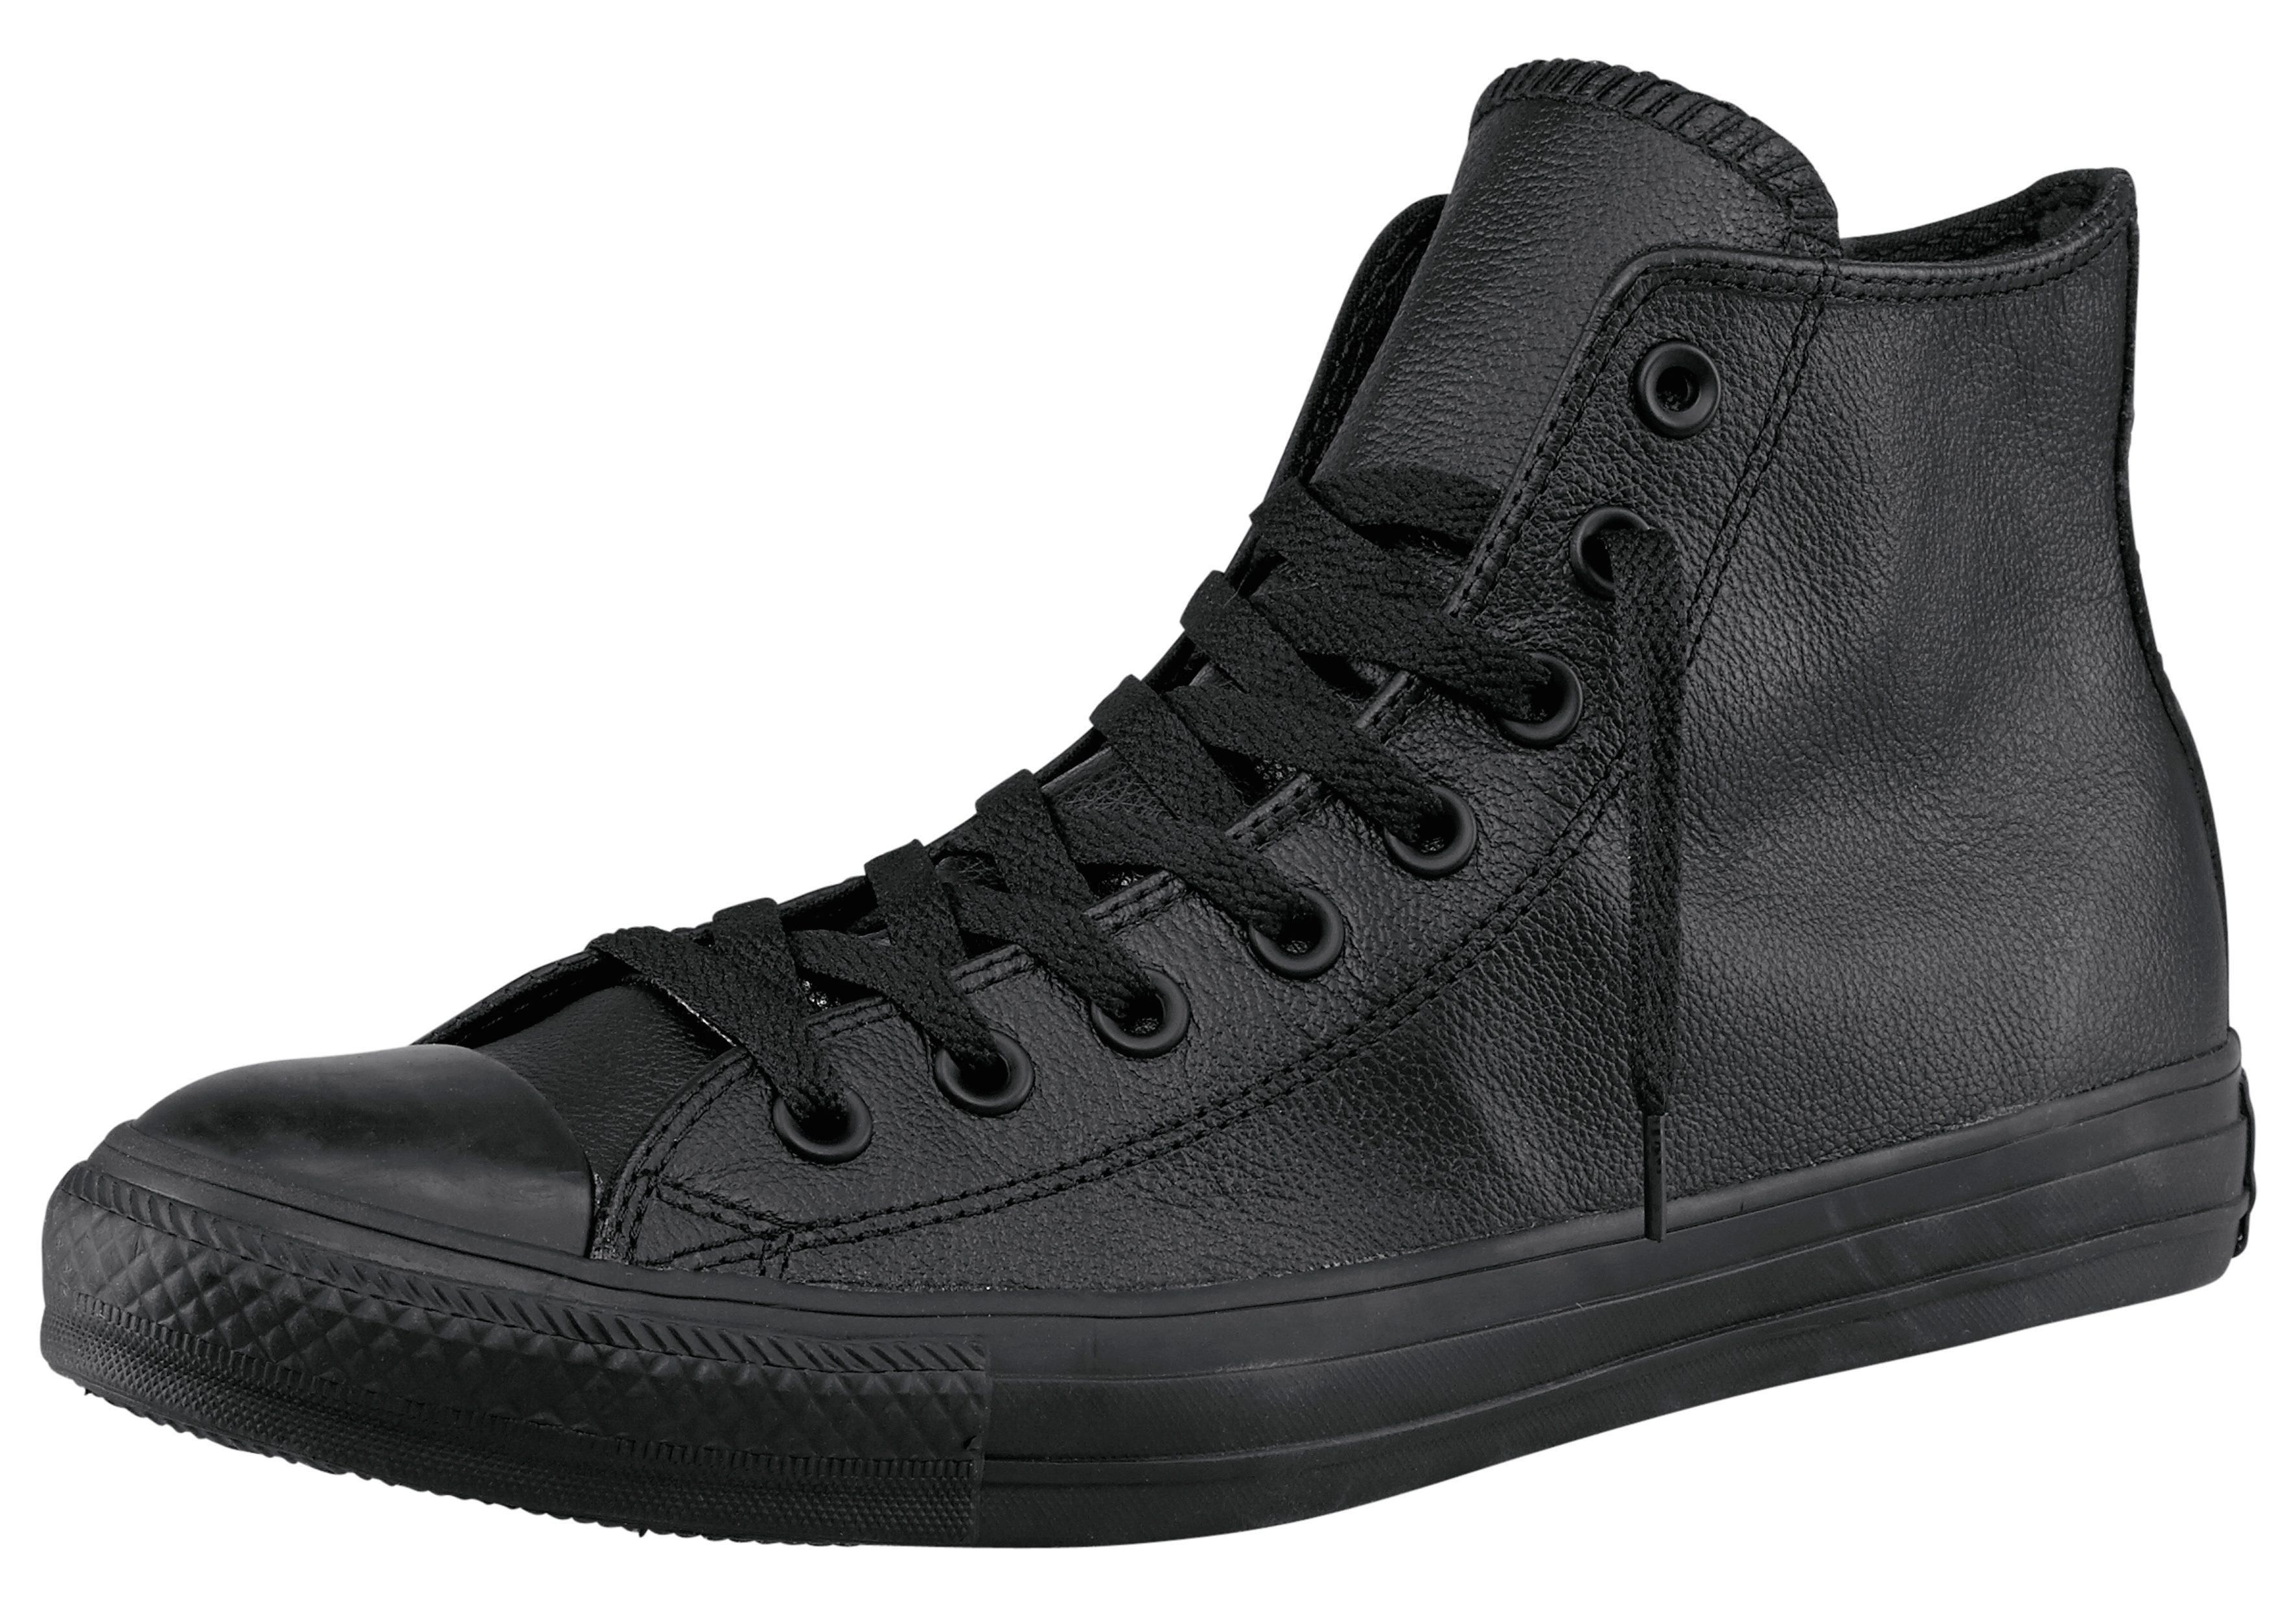 Converse Sneaker "Chuck Taylor All Star Hi Monocrome Leather", Monocrom